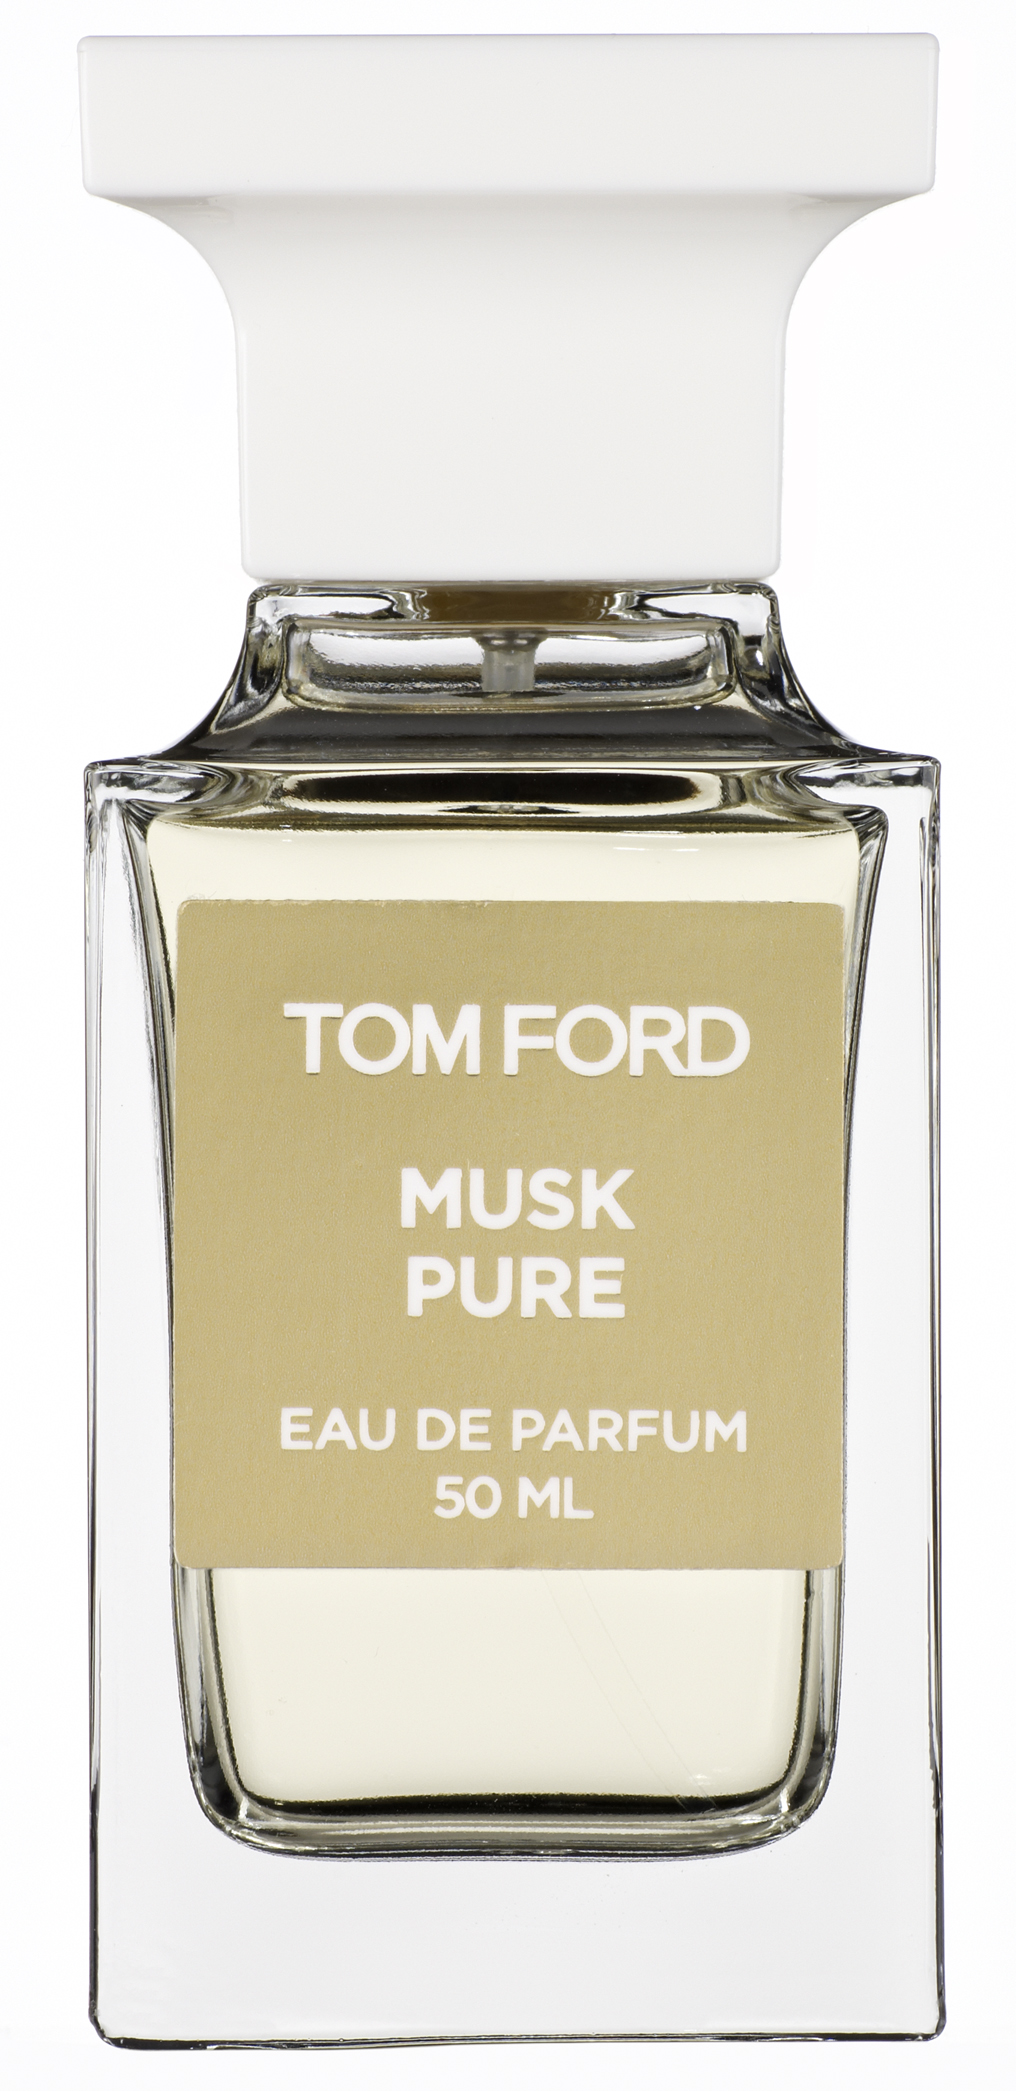 Tom ford musk pure sample #6